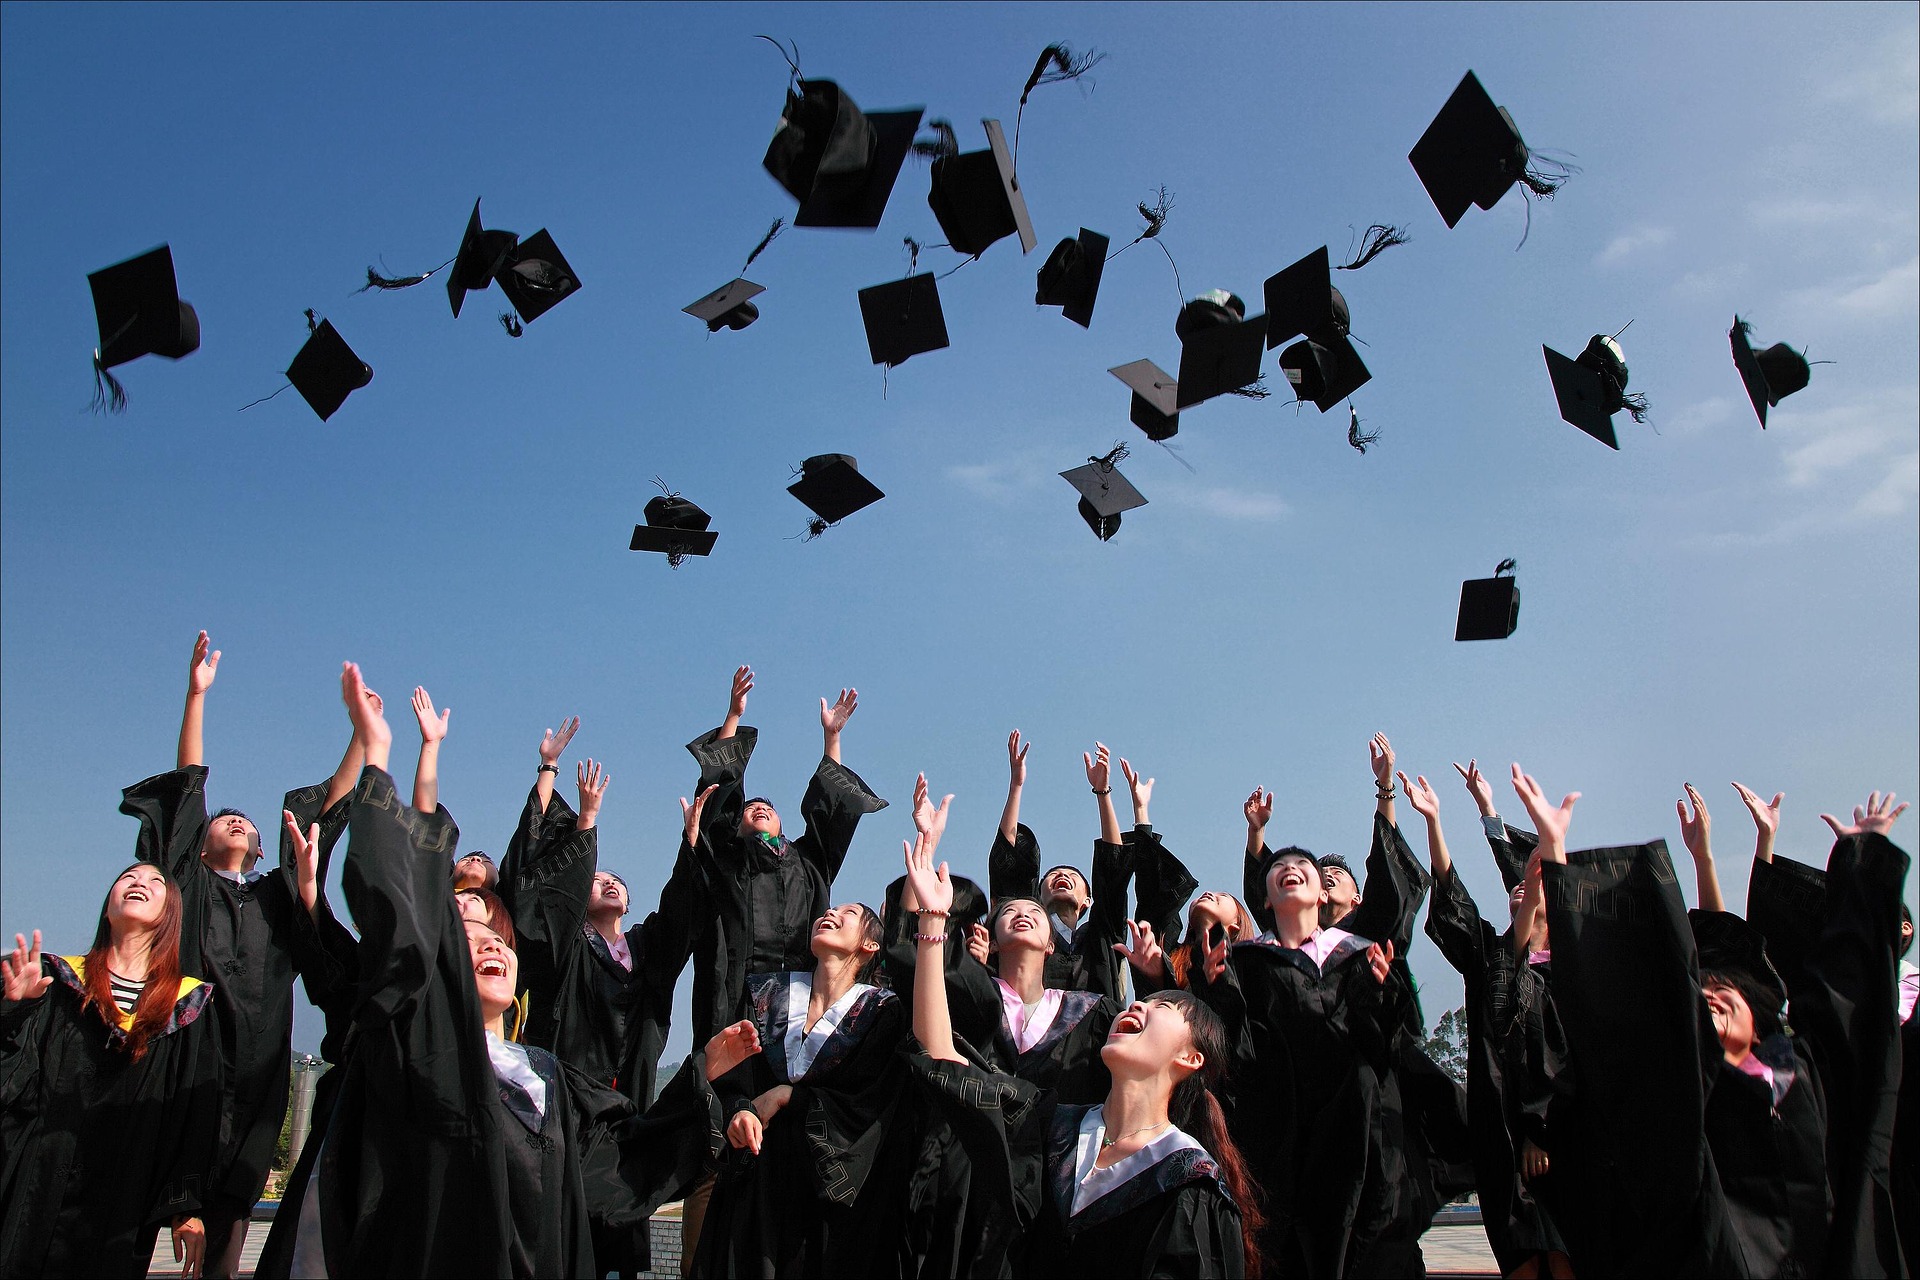 TOP 4 TIPS FOR GRADUATES LOOKING FOR A LOCAL JOB Star Employment Services